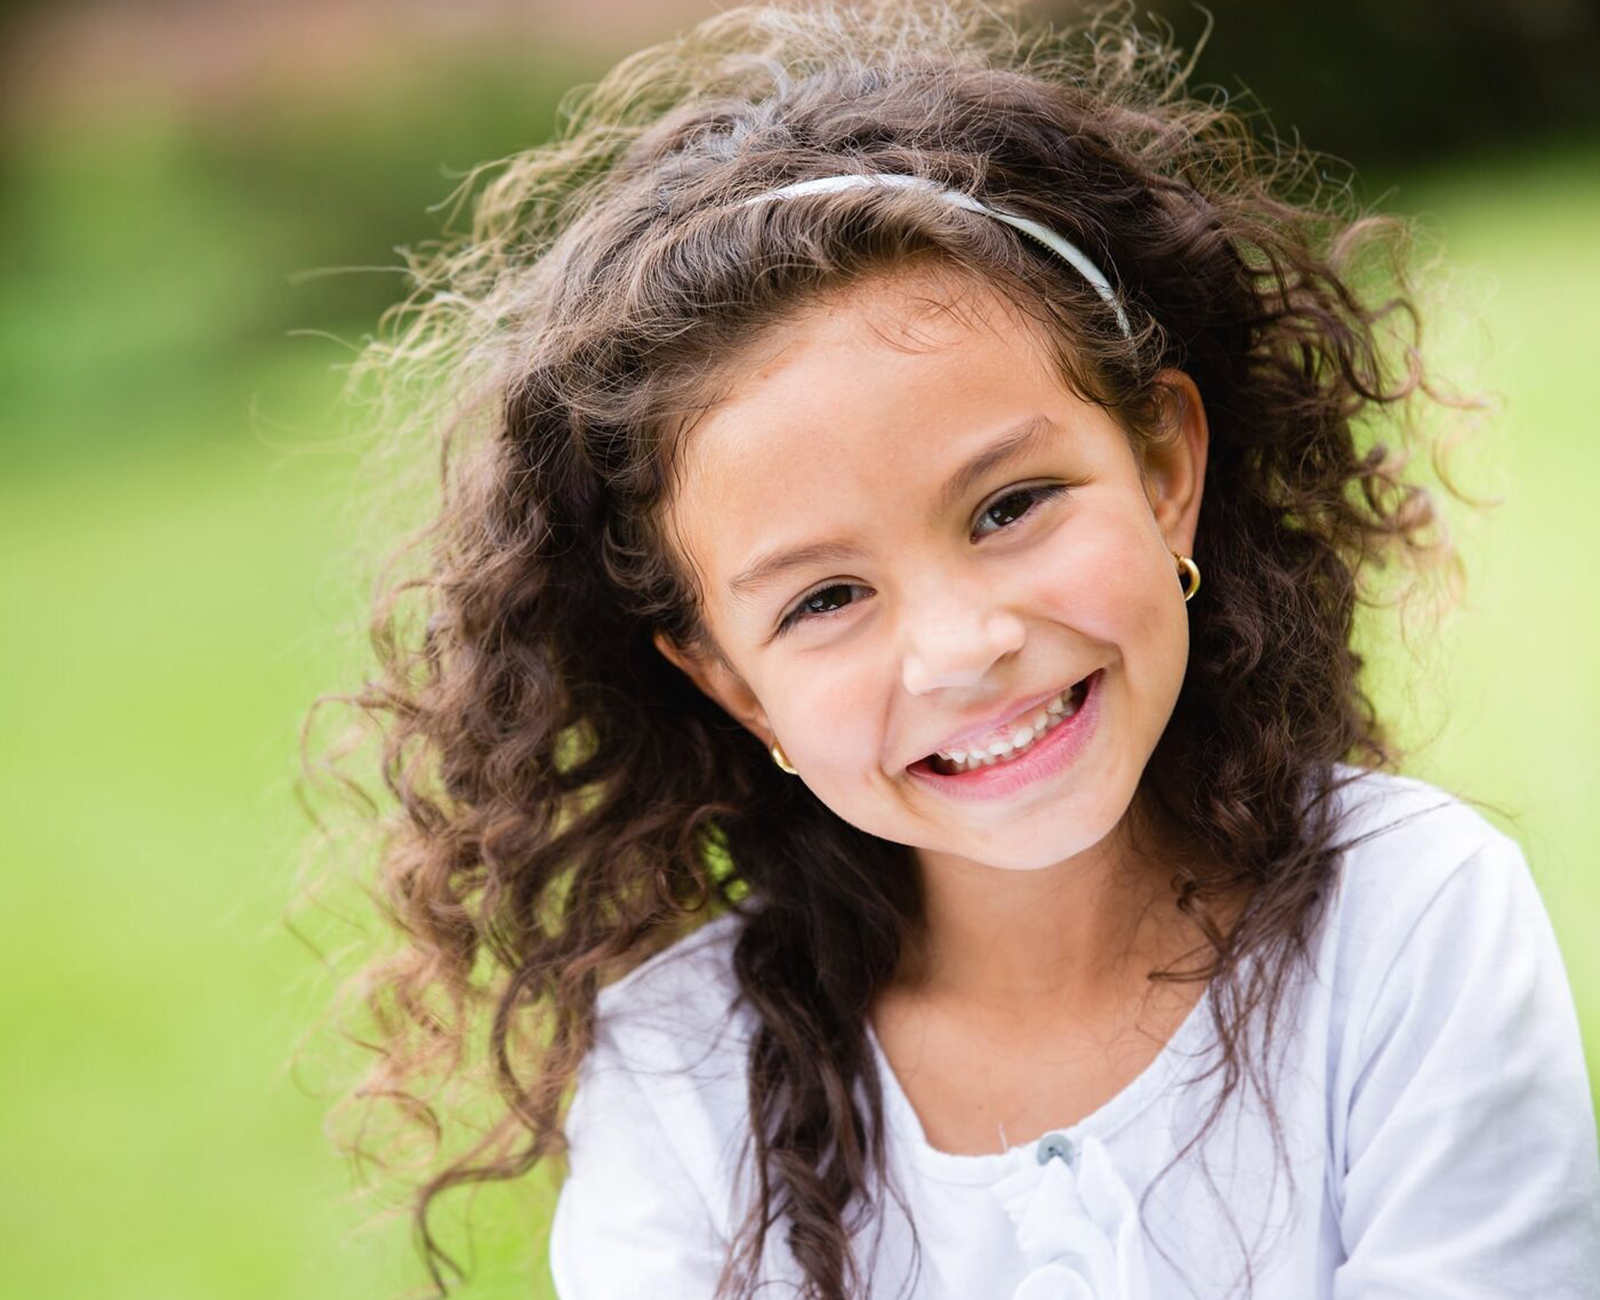 Sweet little girl outdoors with curly hair